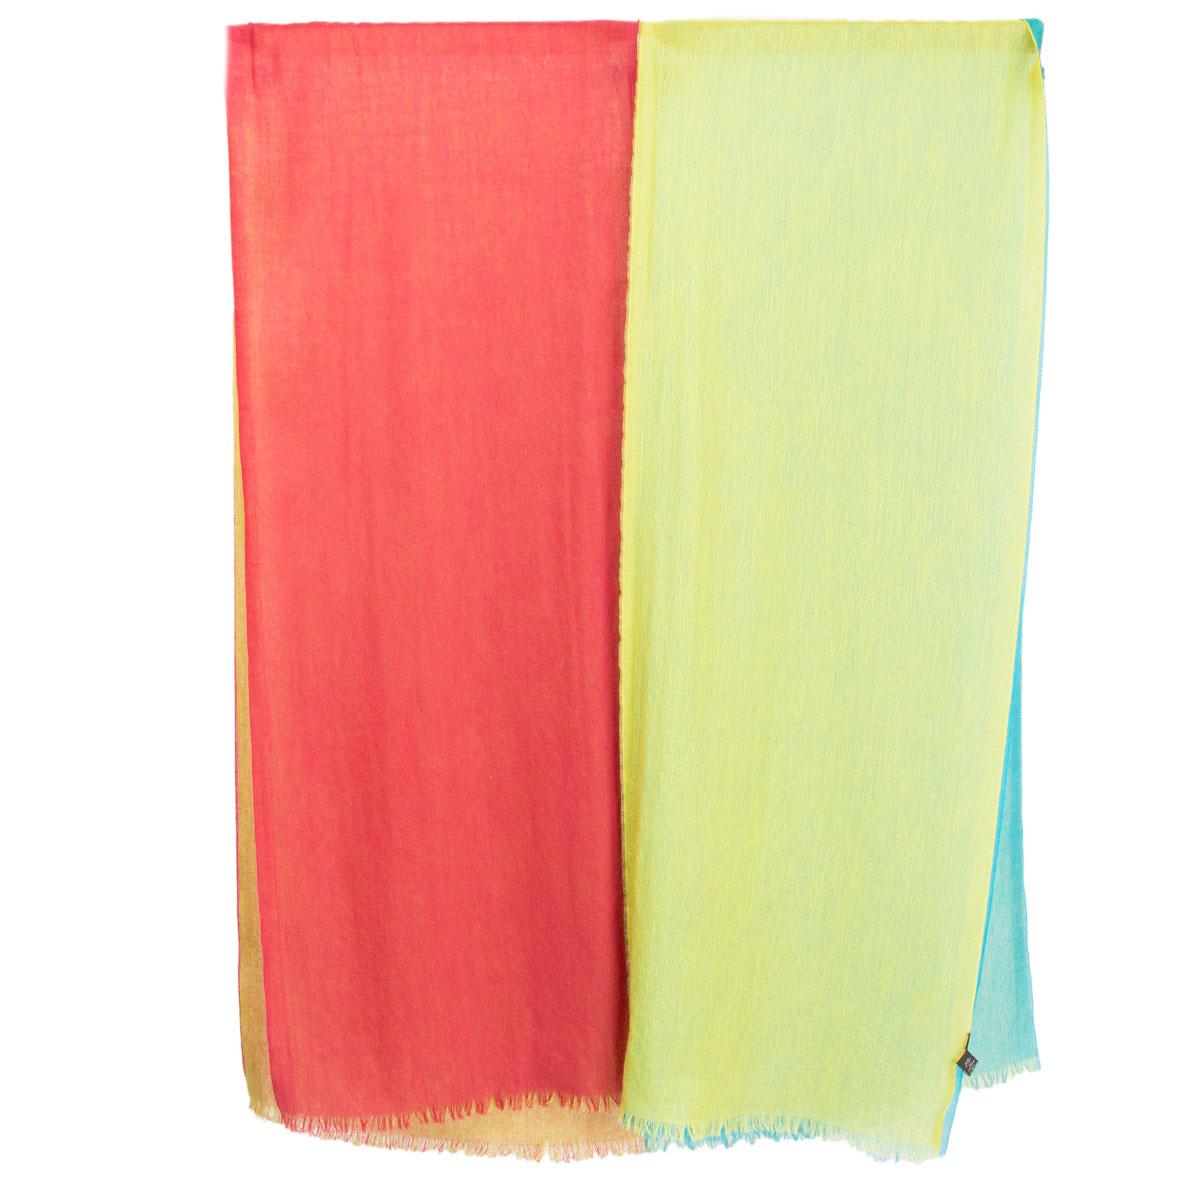 100% authentic Loro Piana shawl in lime, pink and turquoise cashmere (70%) and silk (30%). Has been worn and is in excellent condition. 

Width 73cm (28.5in)
Length 192cm (74.9in)

All our listings include only the listed item unless otherwise